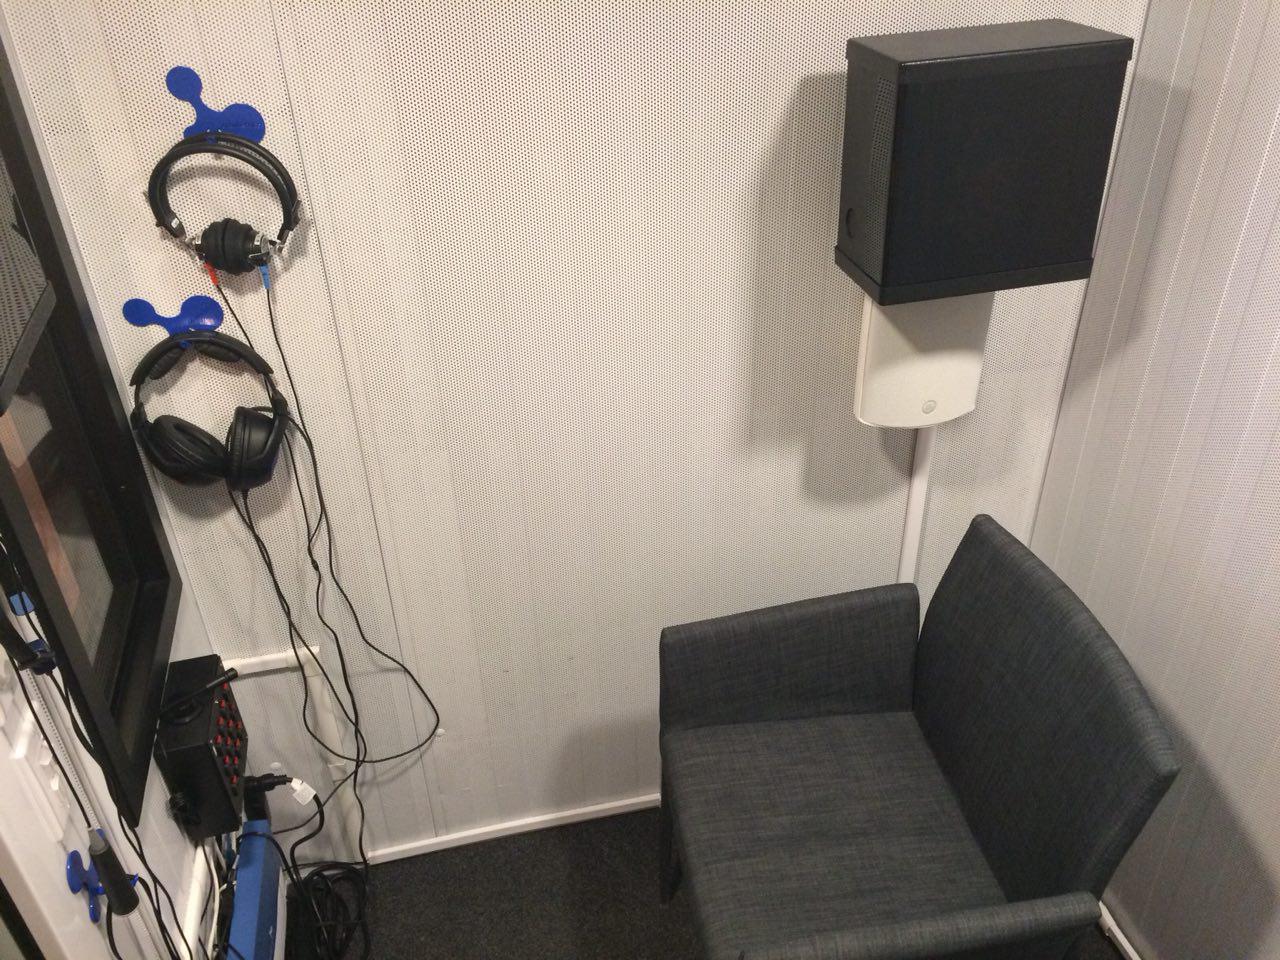 soundproof booth for hearing tests